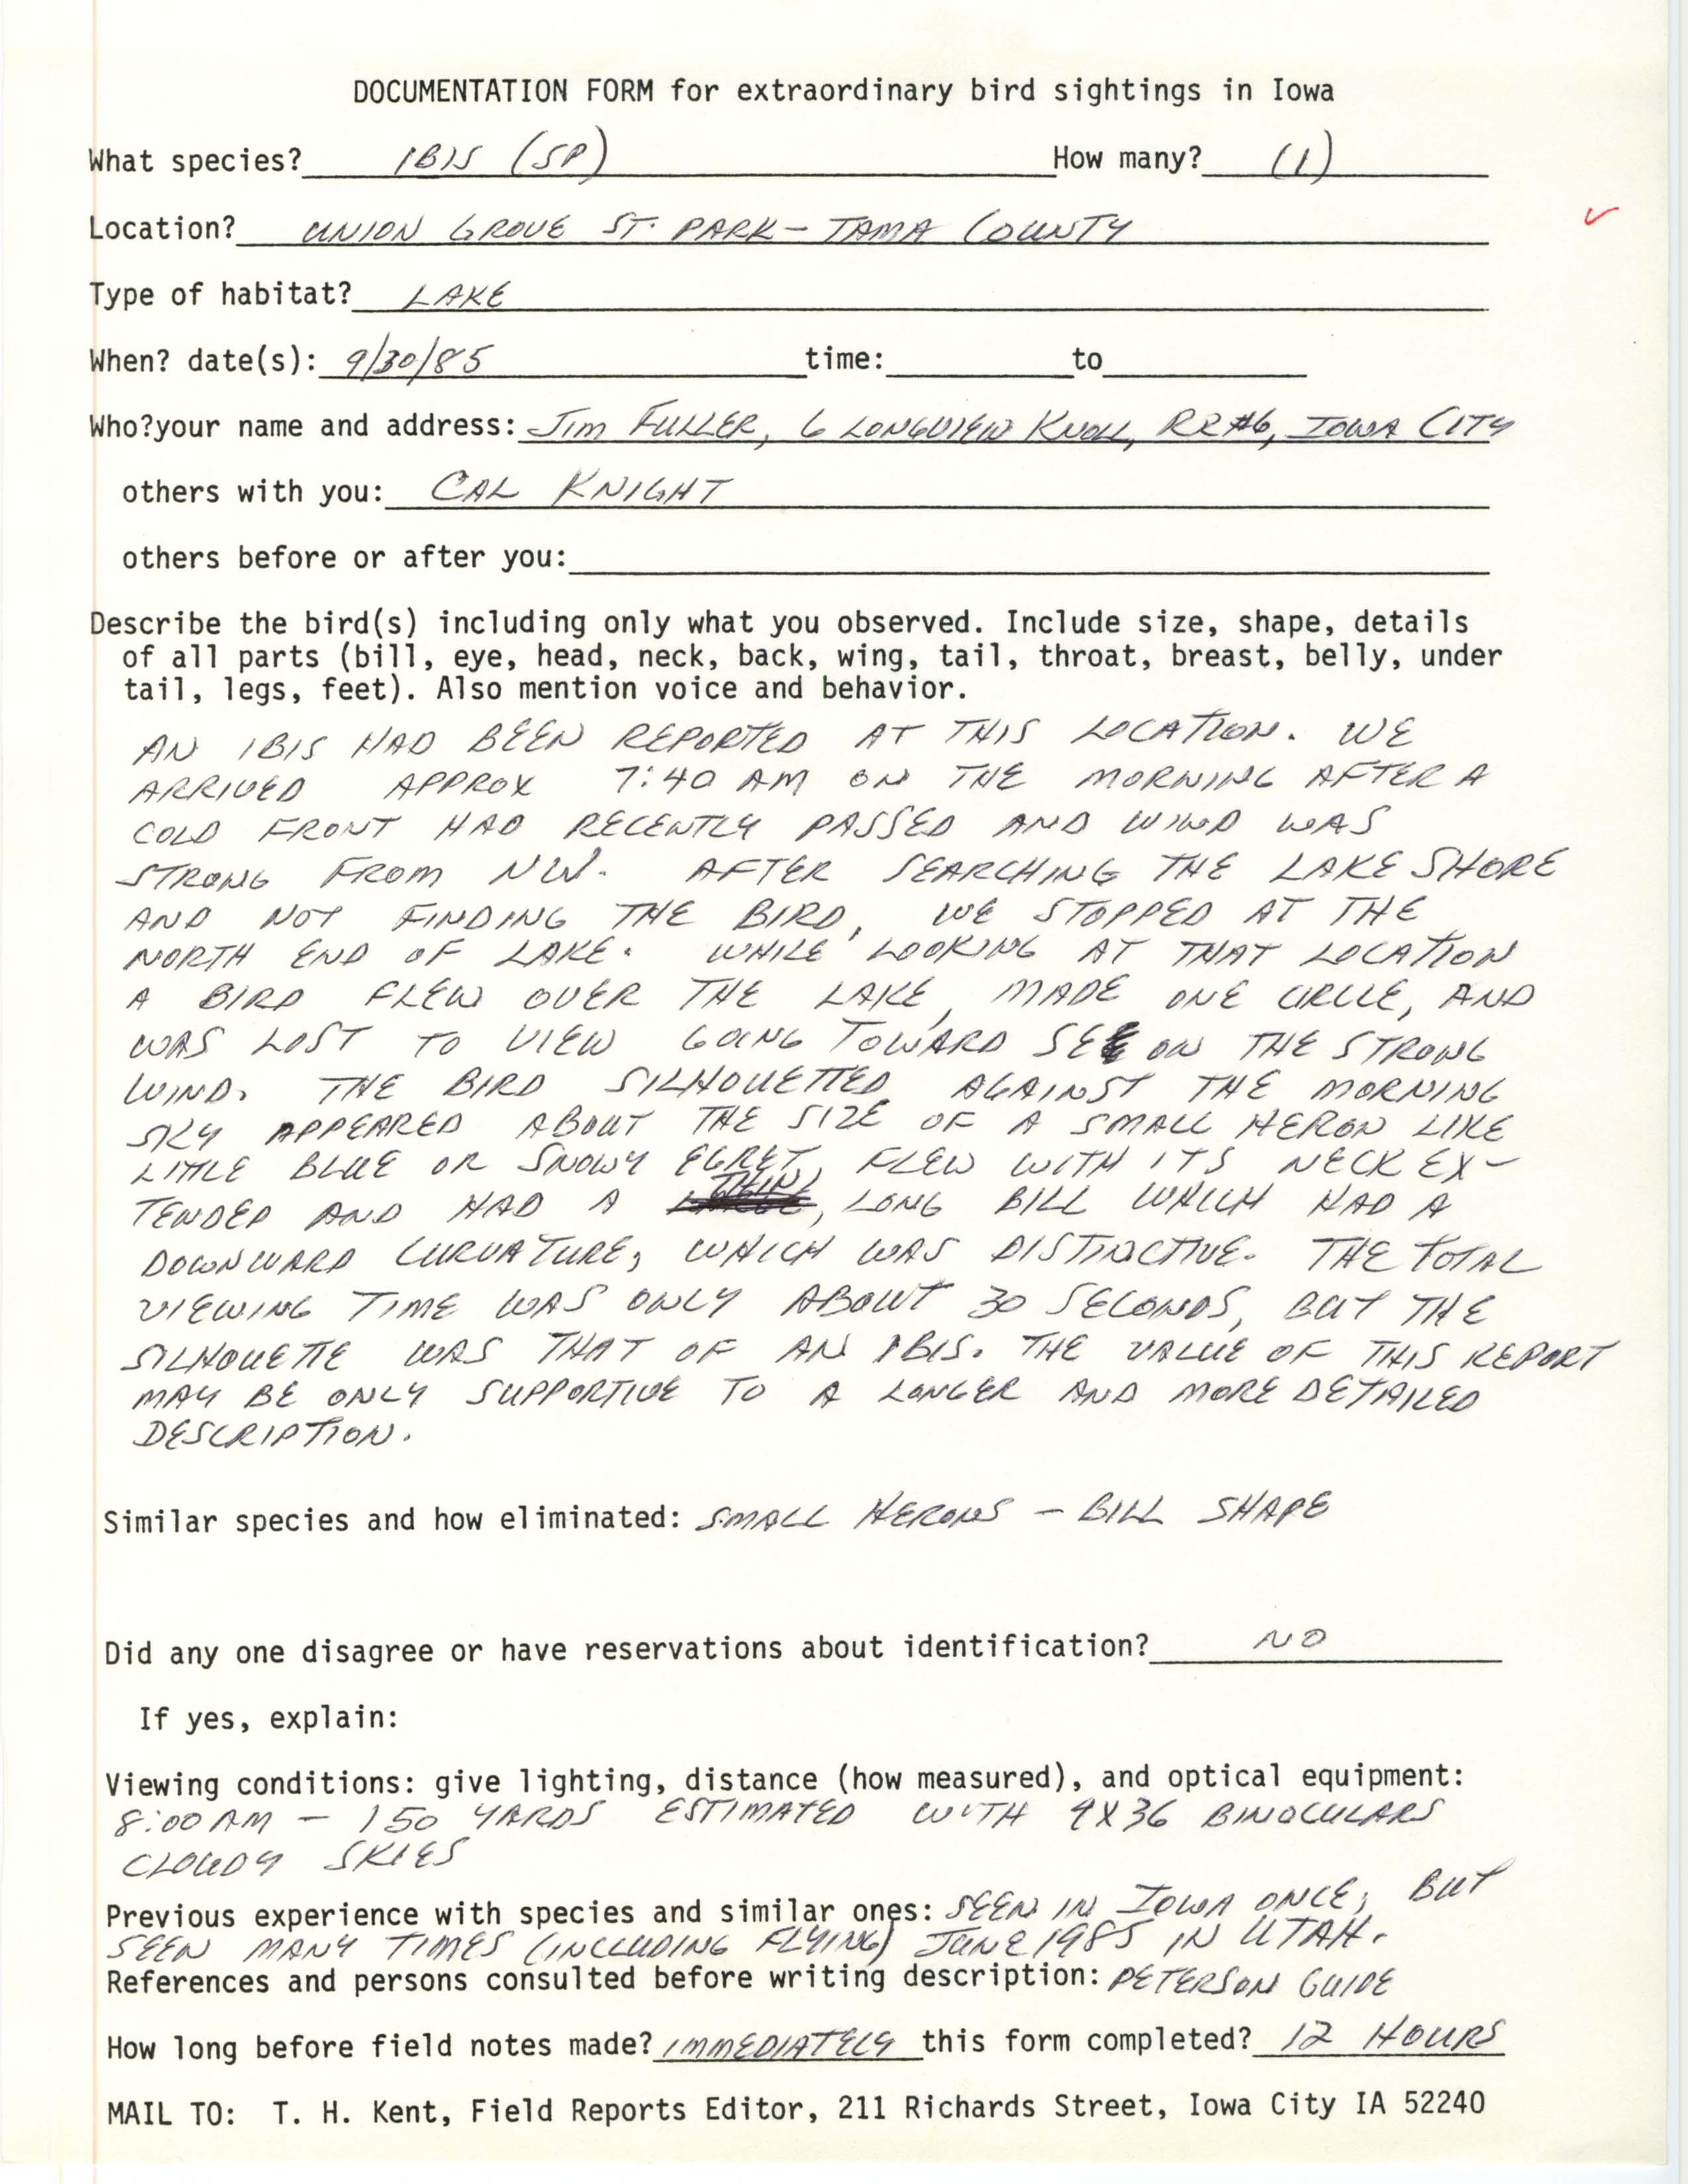 Rare bird documentation form for Ibis species at Union Grove State Park, 1985